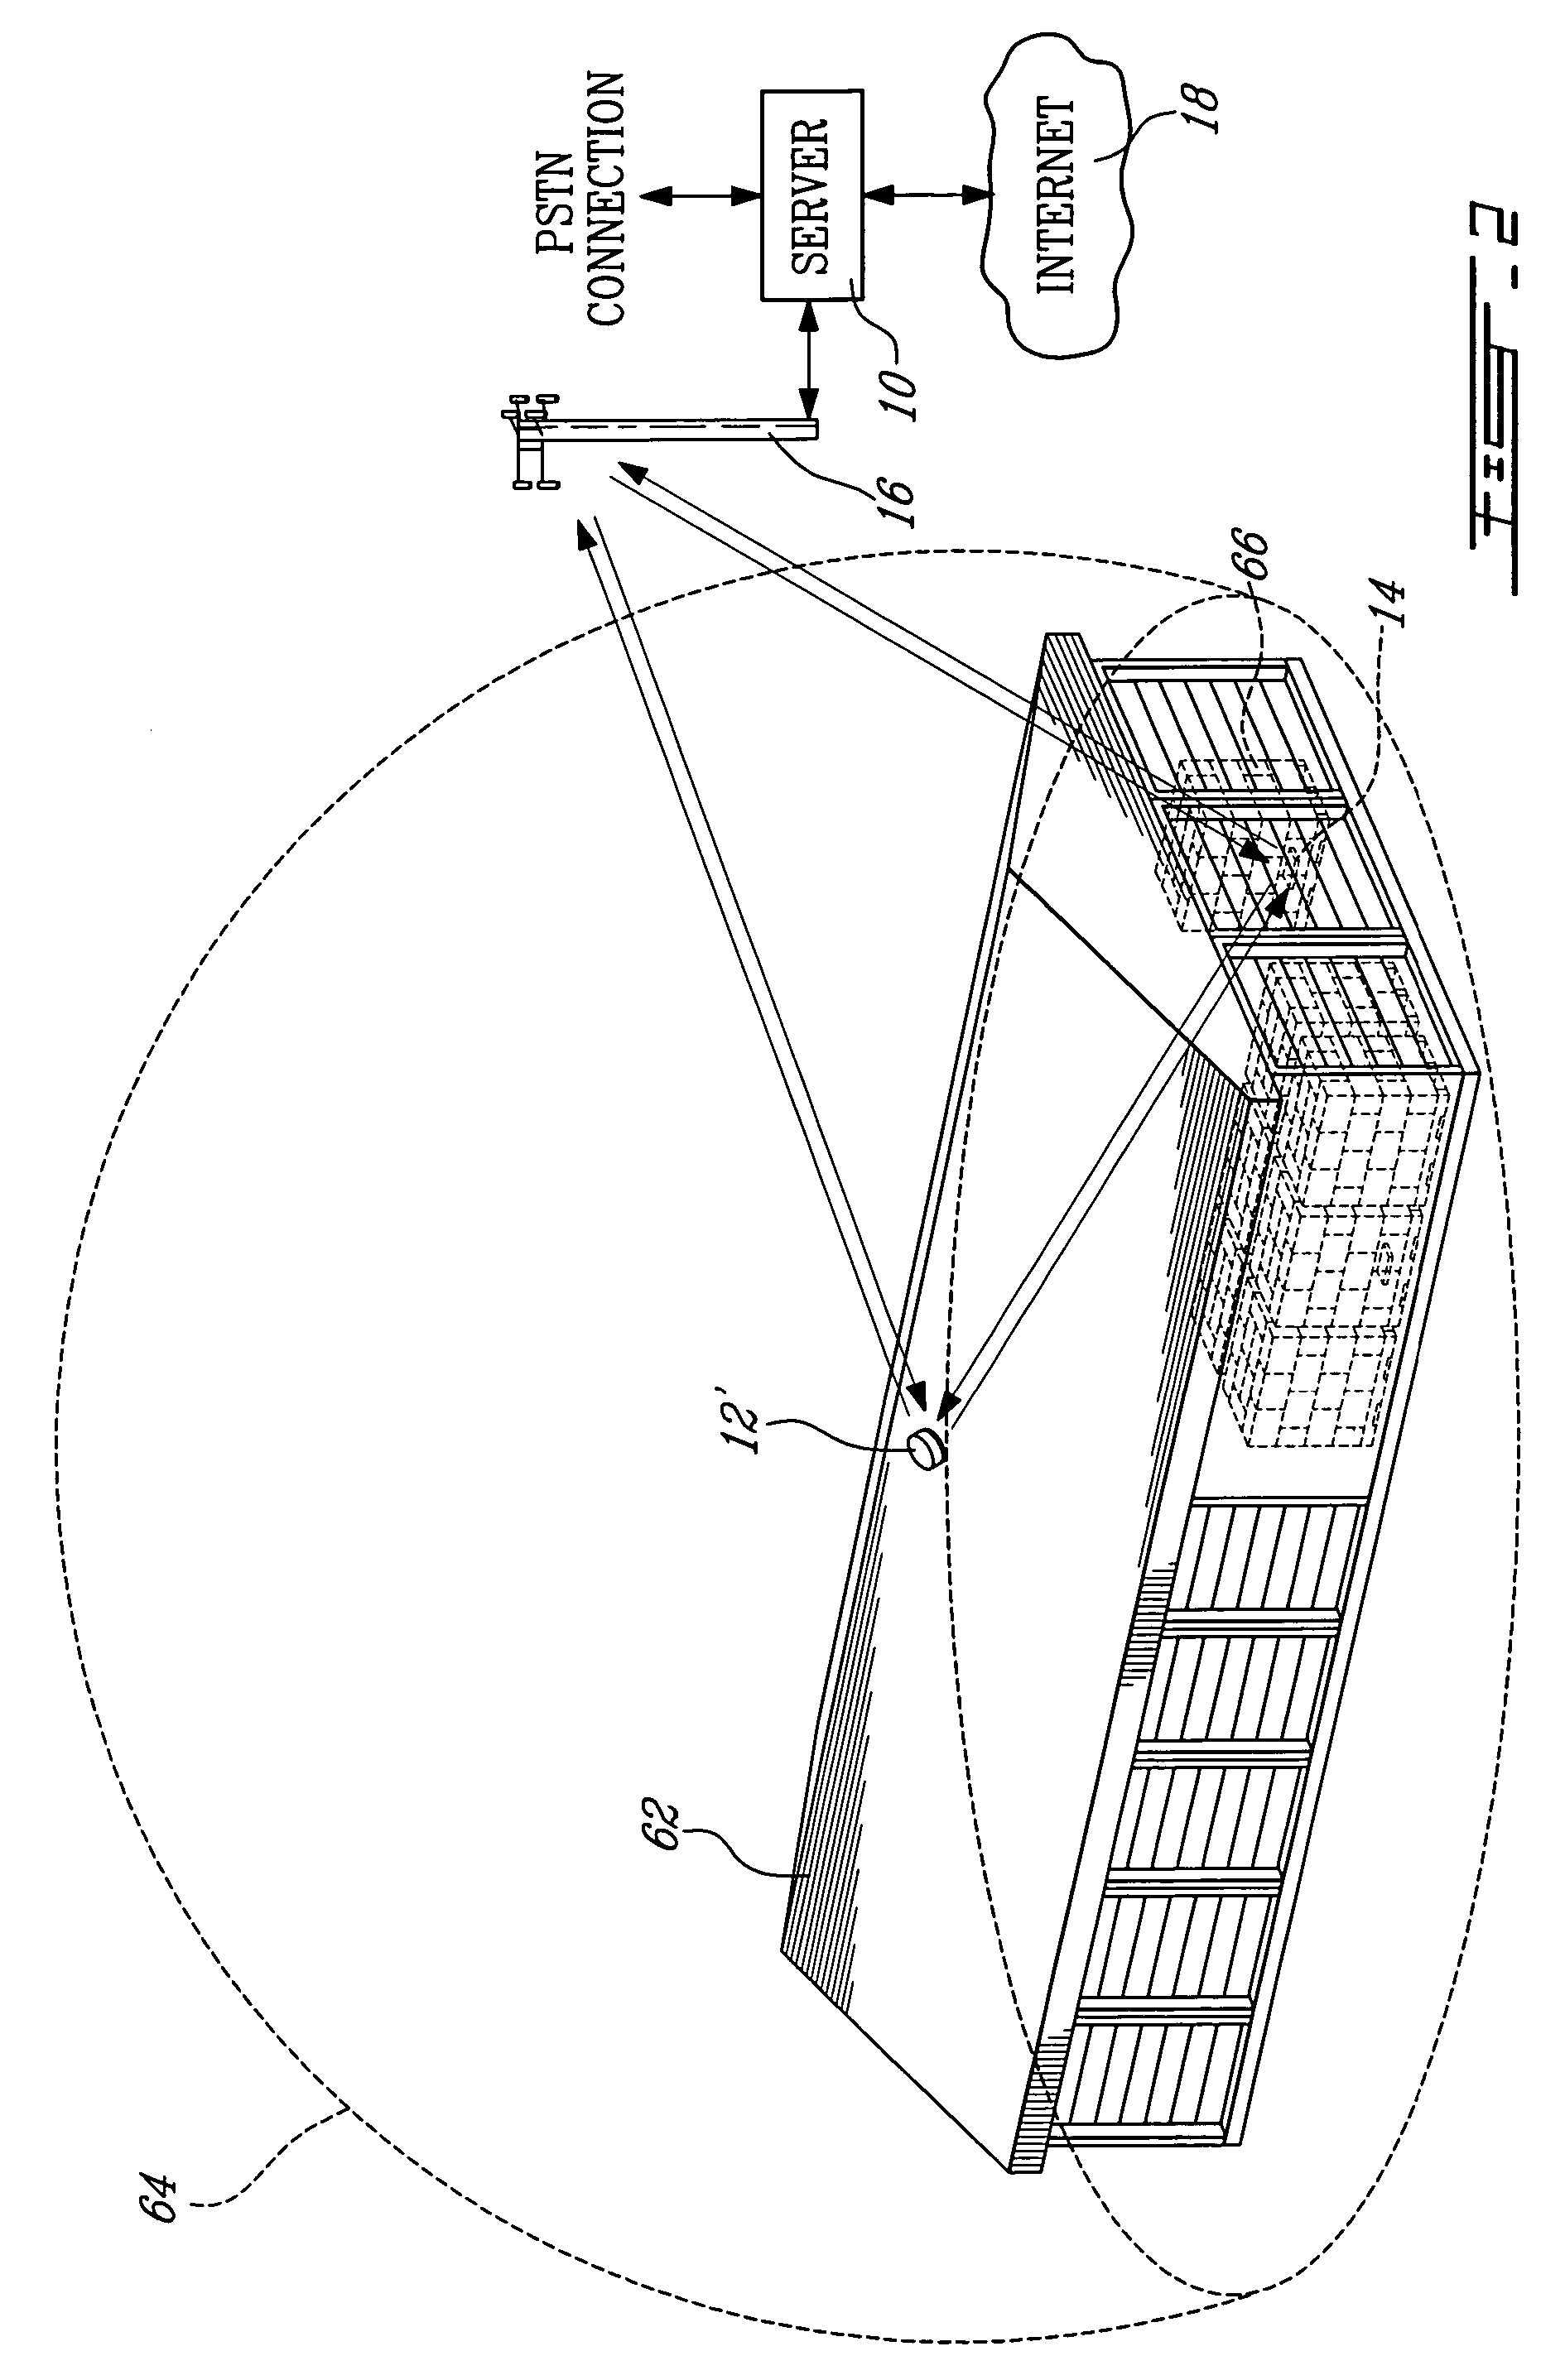 System and method for cargo protection